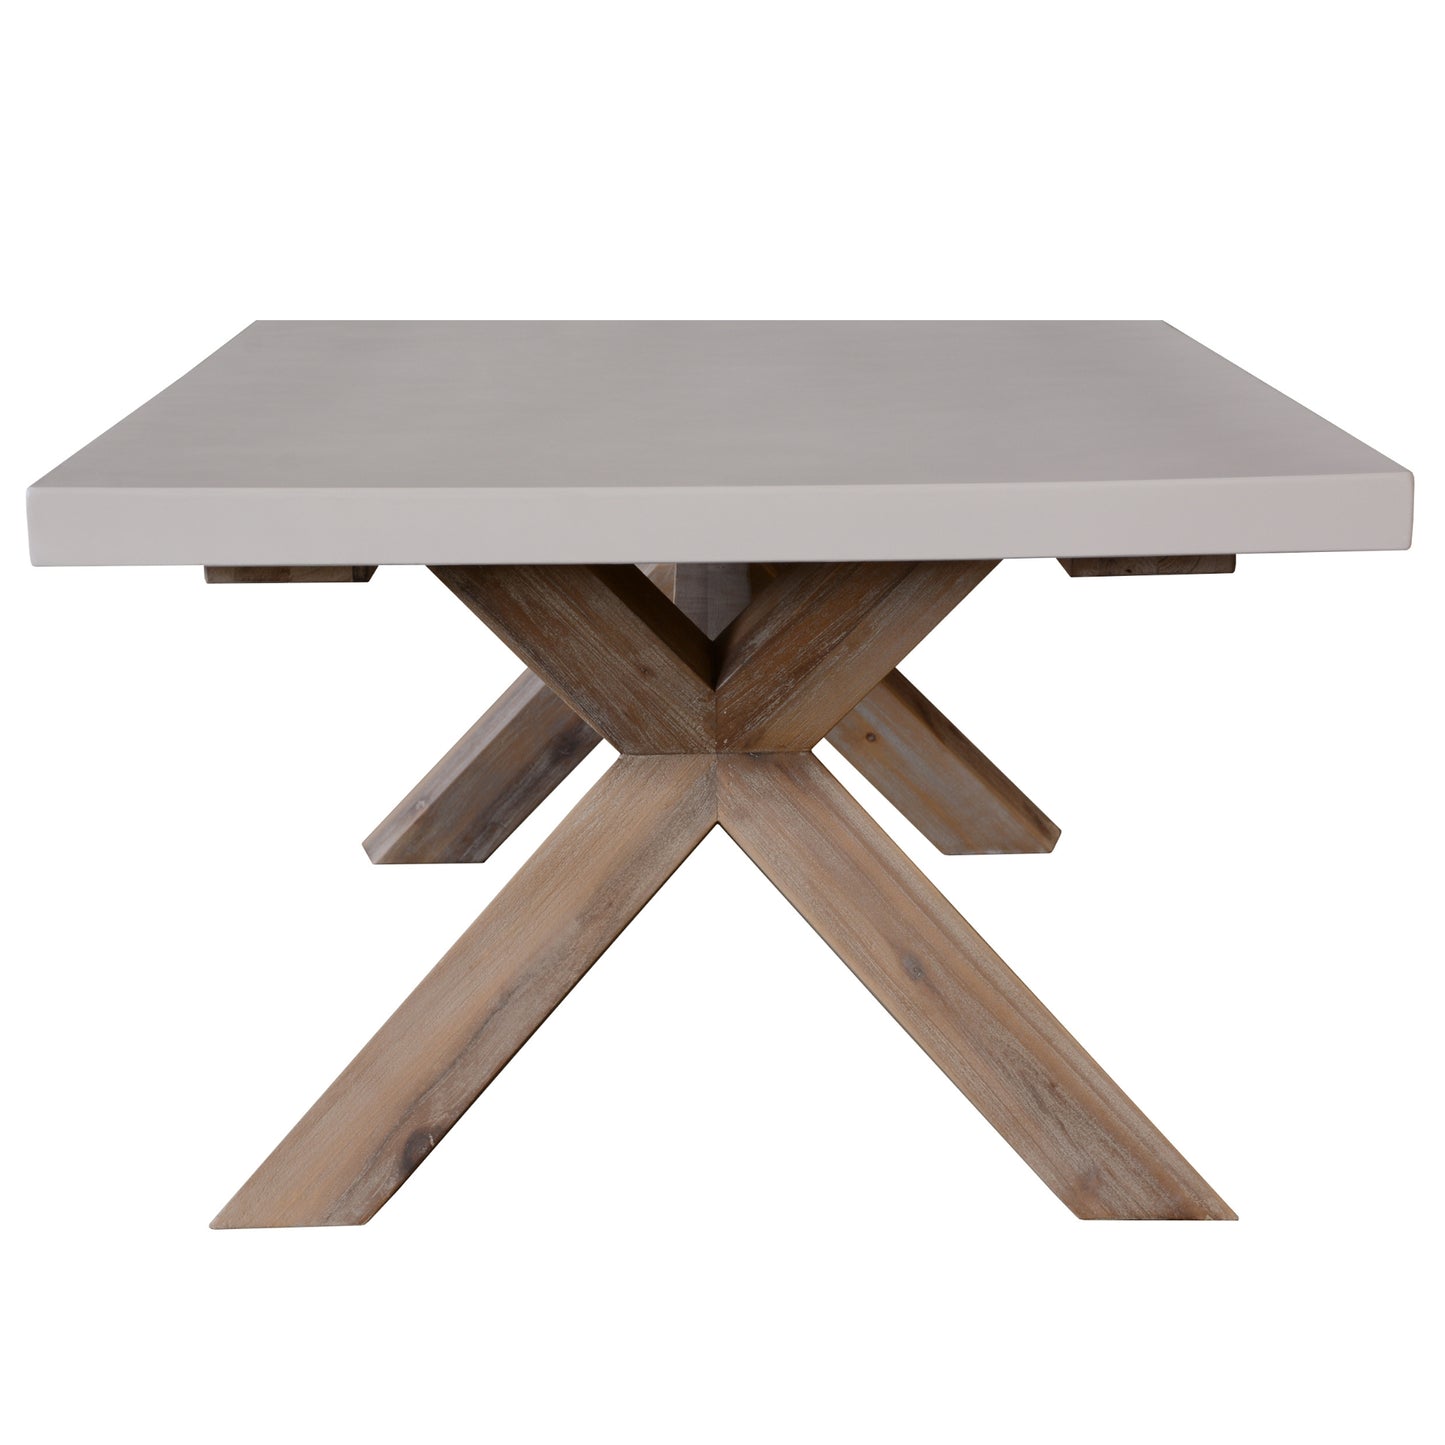 Stony 120cm Coffee Table with Concrete Top - White